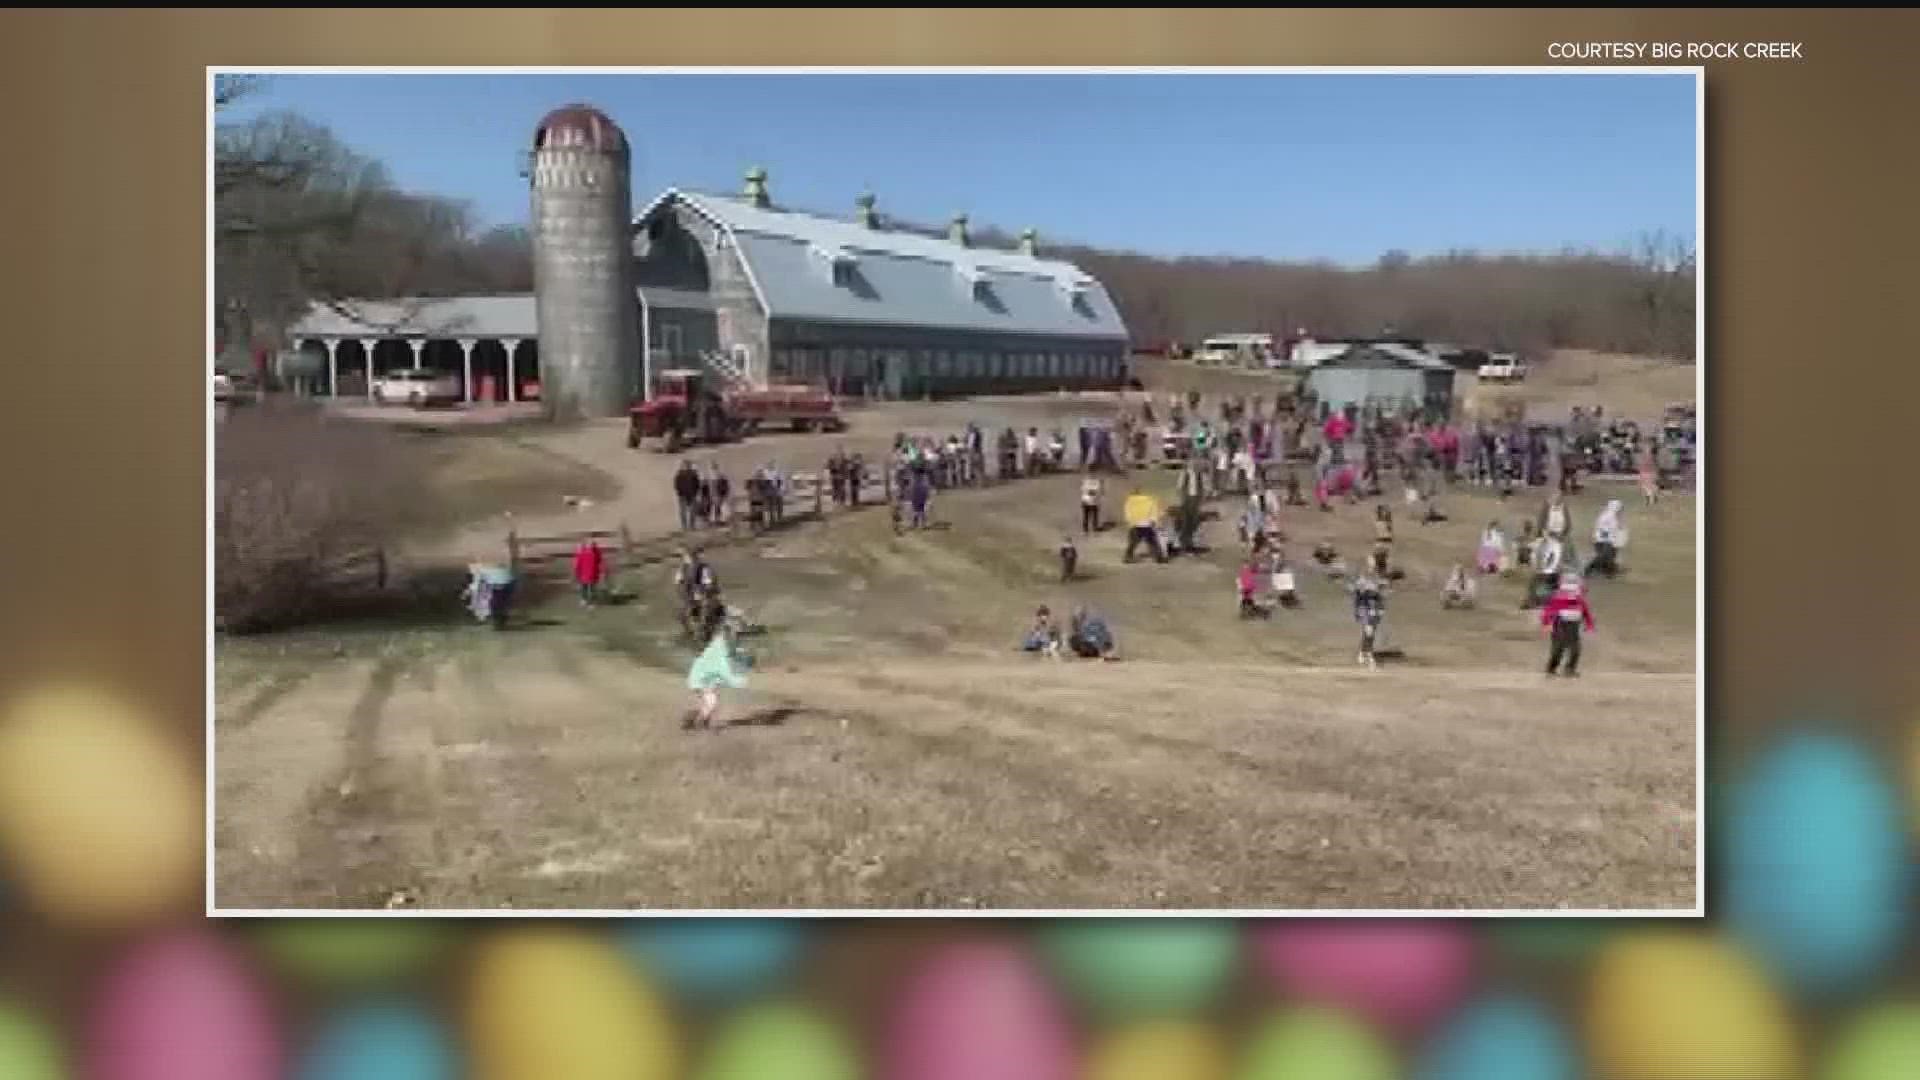 The two-day event will feature more than 30 vendors, the Easter Bunny, wagon rides, an Easter egg hunt, a petting zoo and more.